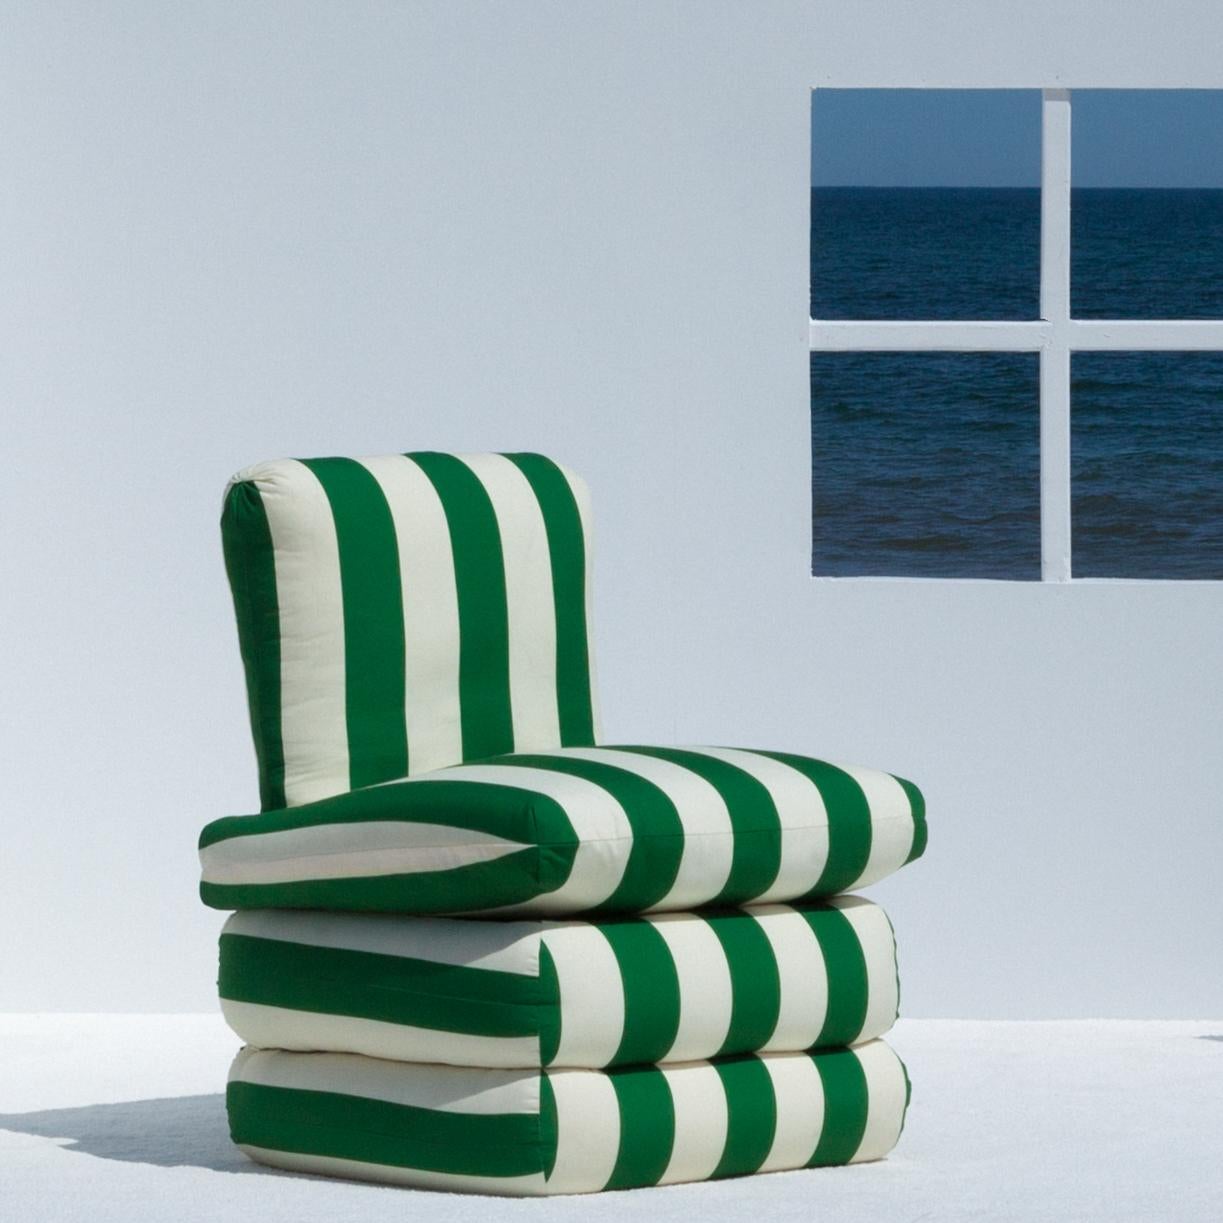 Inspired by the relaxed glamour of the 1960s Italian Riviera, our new Pillow chair physically embodies the longing for lazy summer days with a comfortable, fully upholstered chair in colorful and Classic stripes.

The upholstered shape brings to